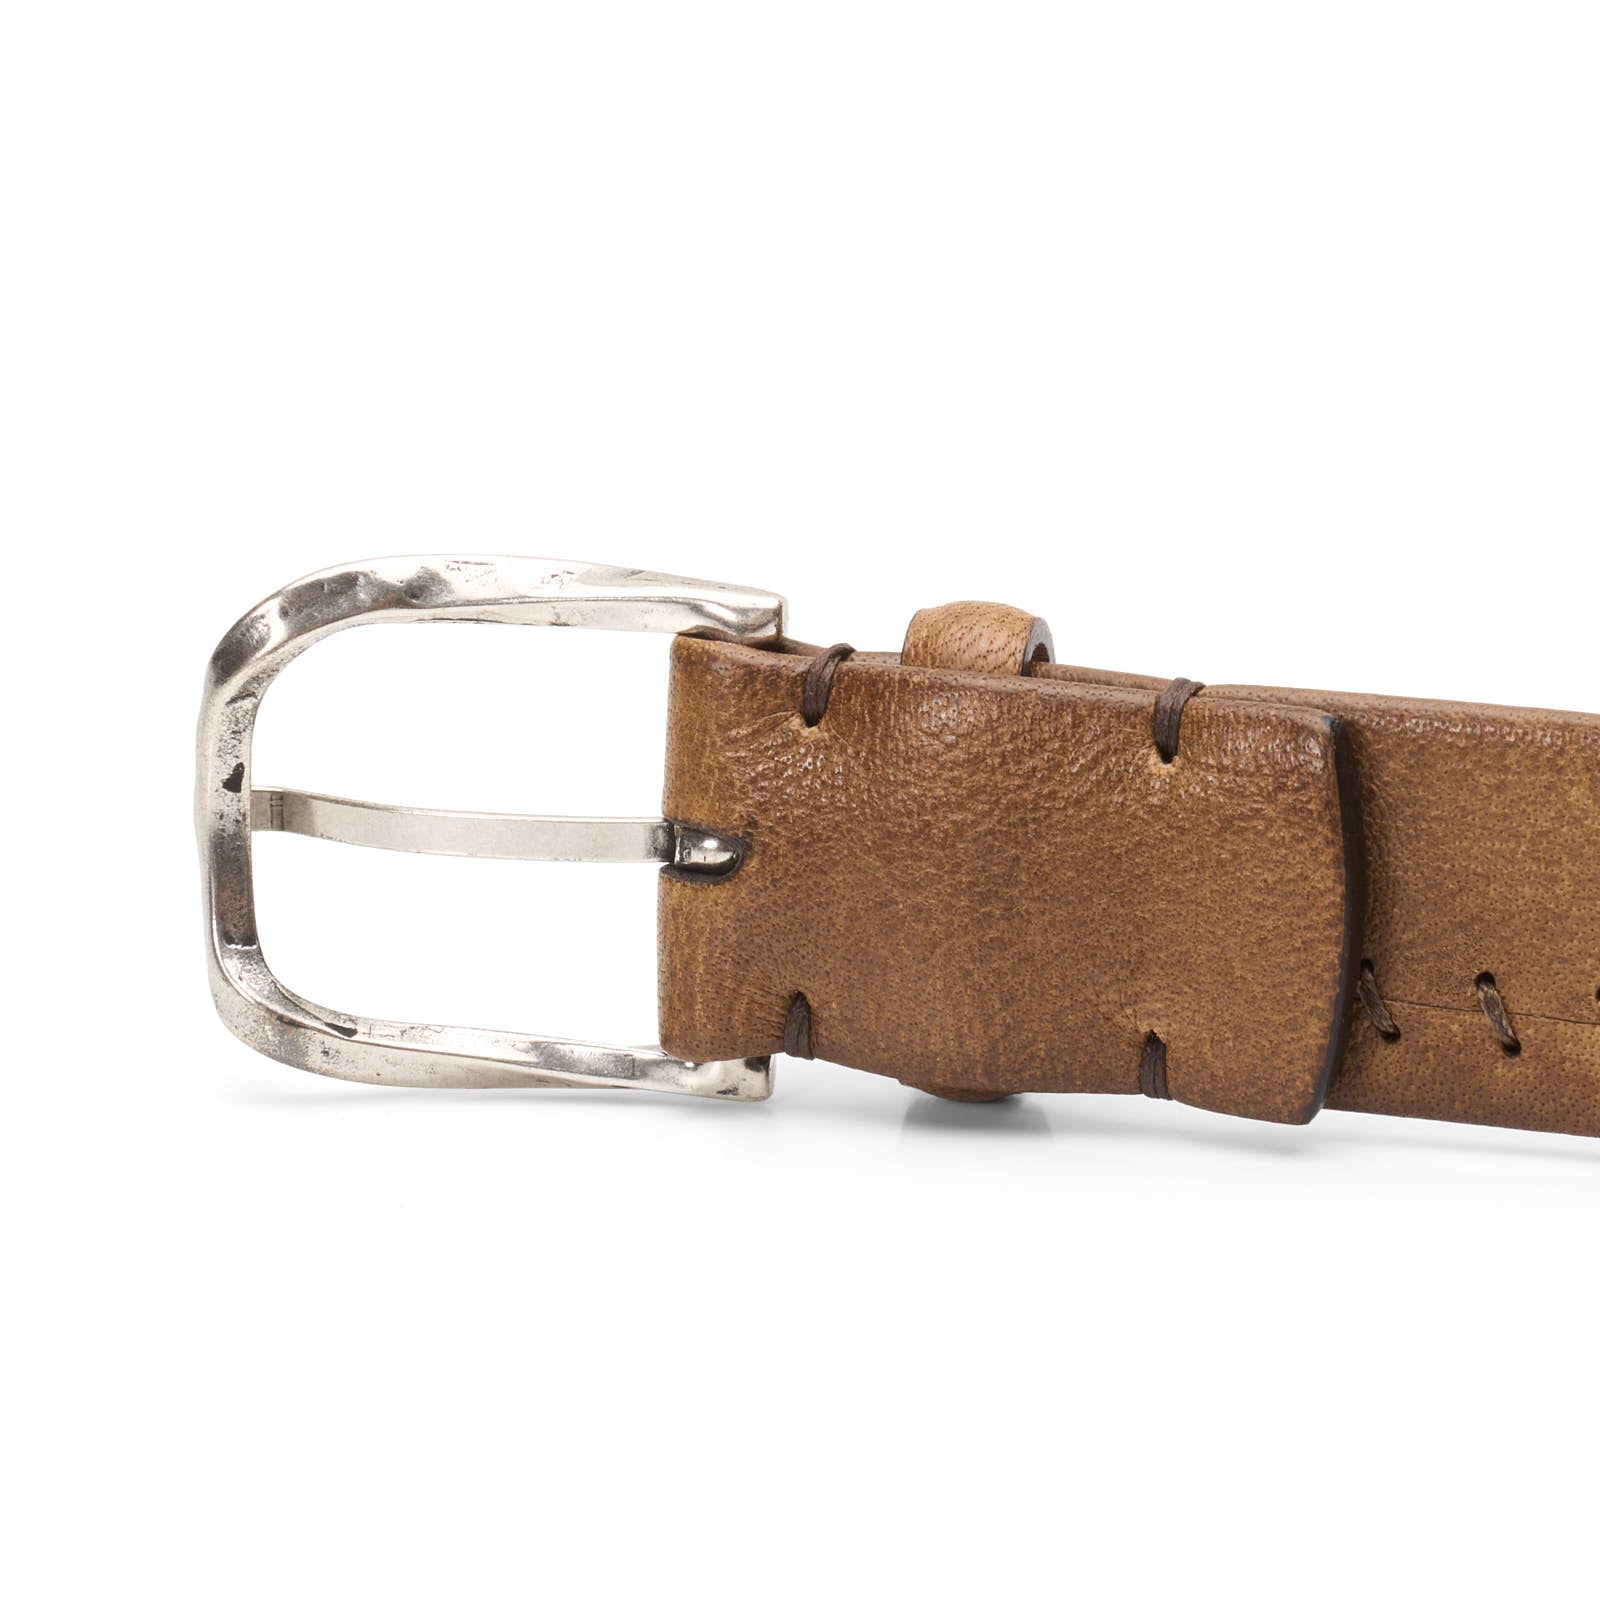 PAOLO VITALE Handmade Tobacco Brown Leather Silver-Tone Buckle Tubular Belt NEW